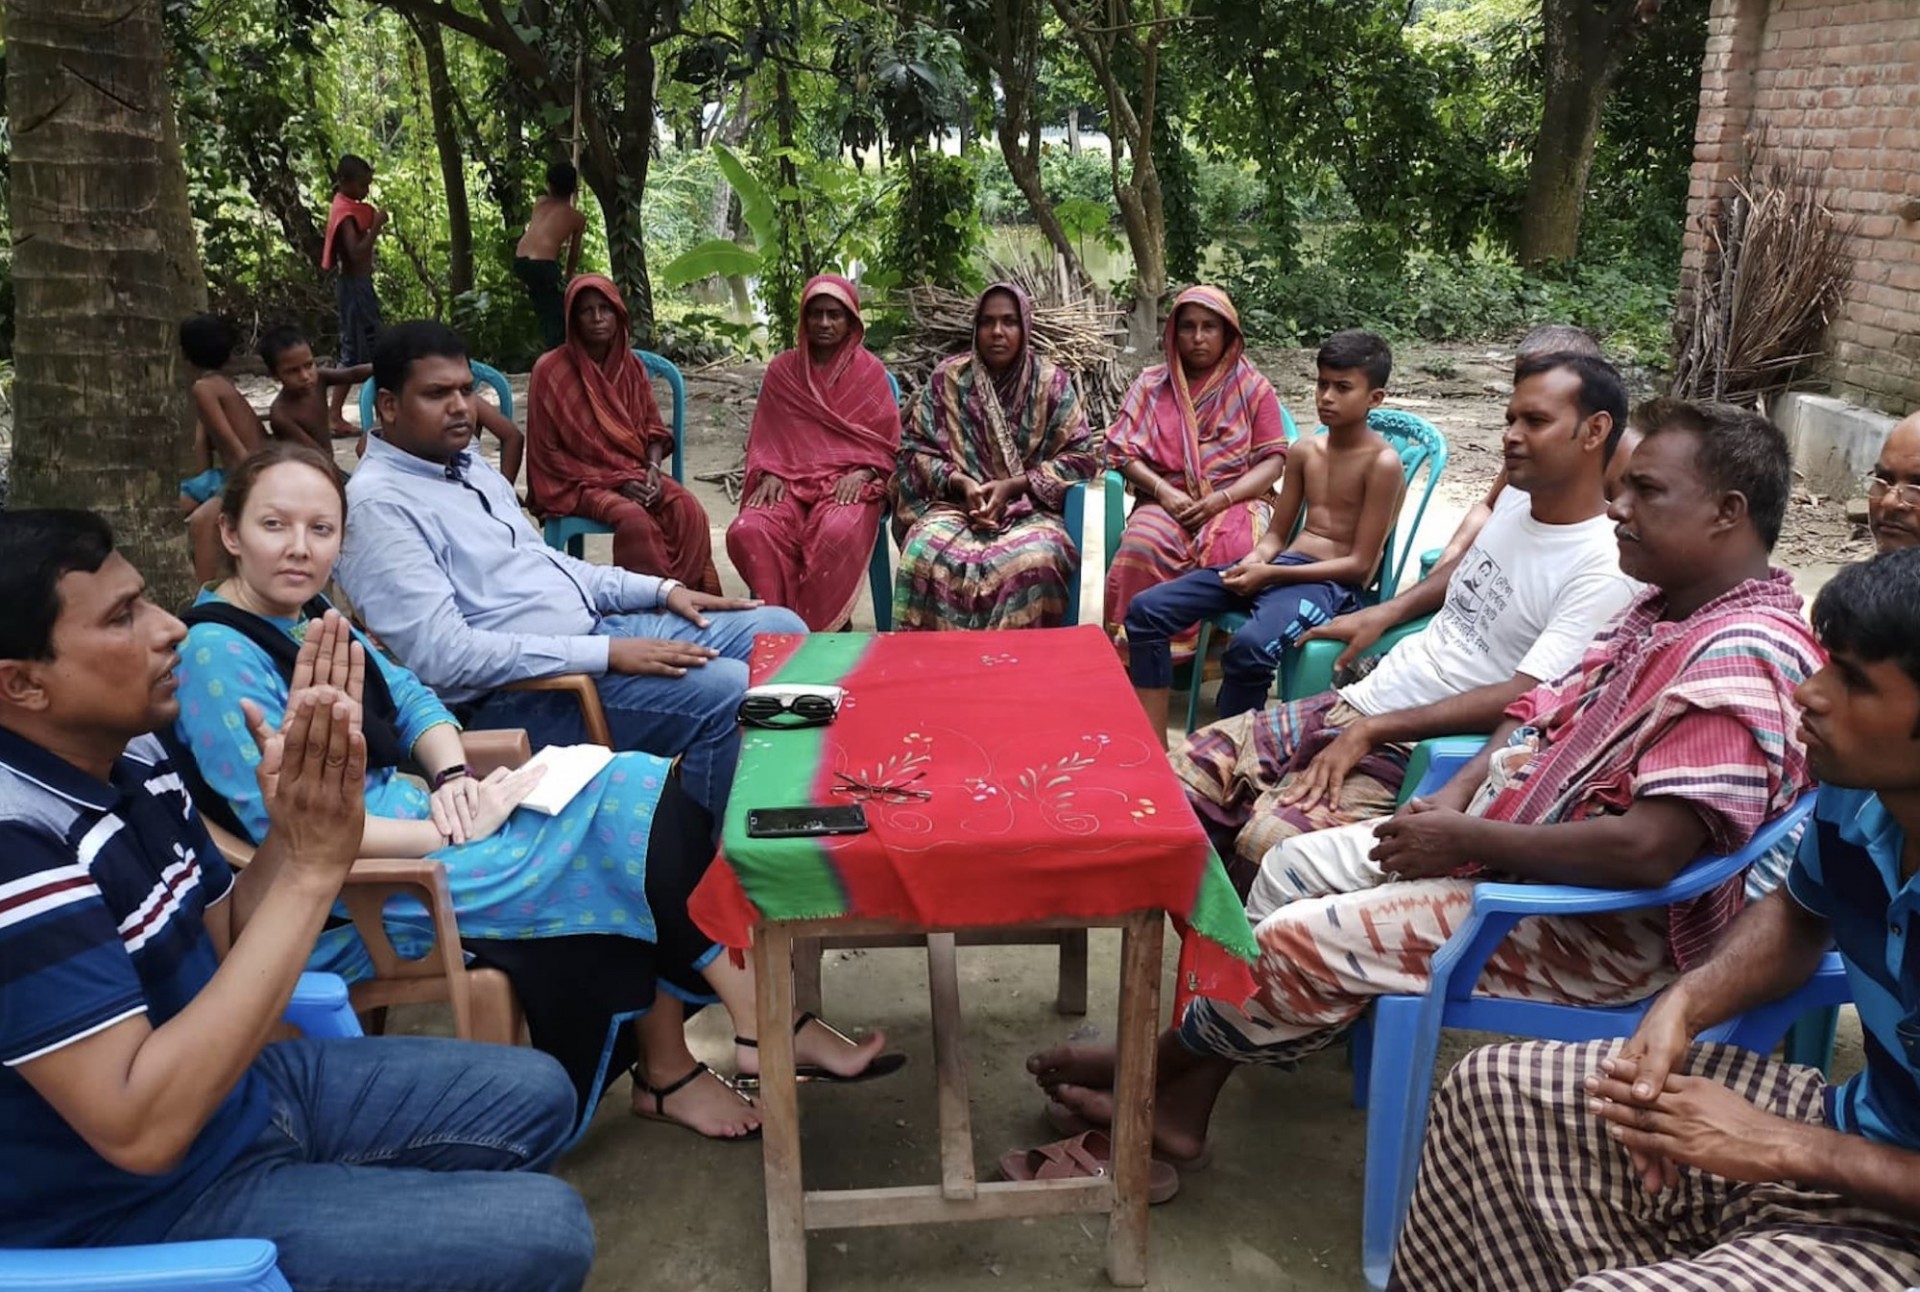 Photo of Sarah Johnson with farmers in Bangladesh. Credit: Mesbahul Haque.